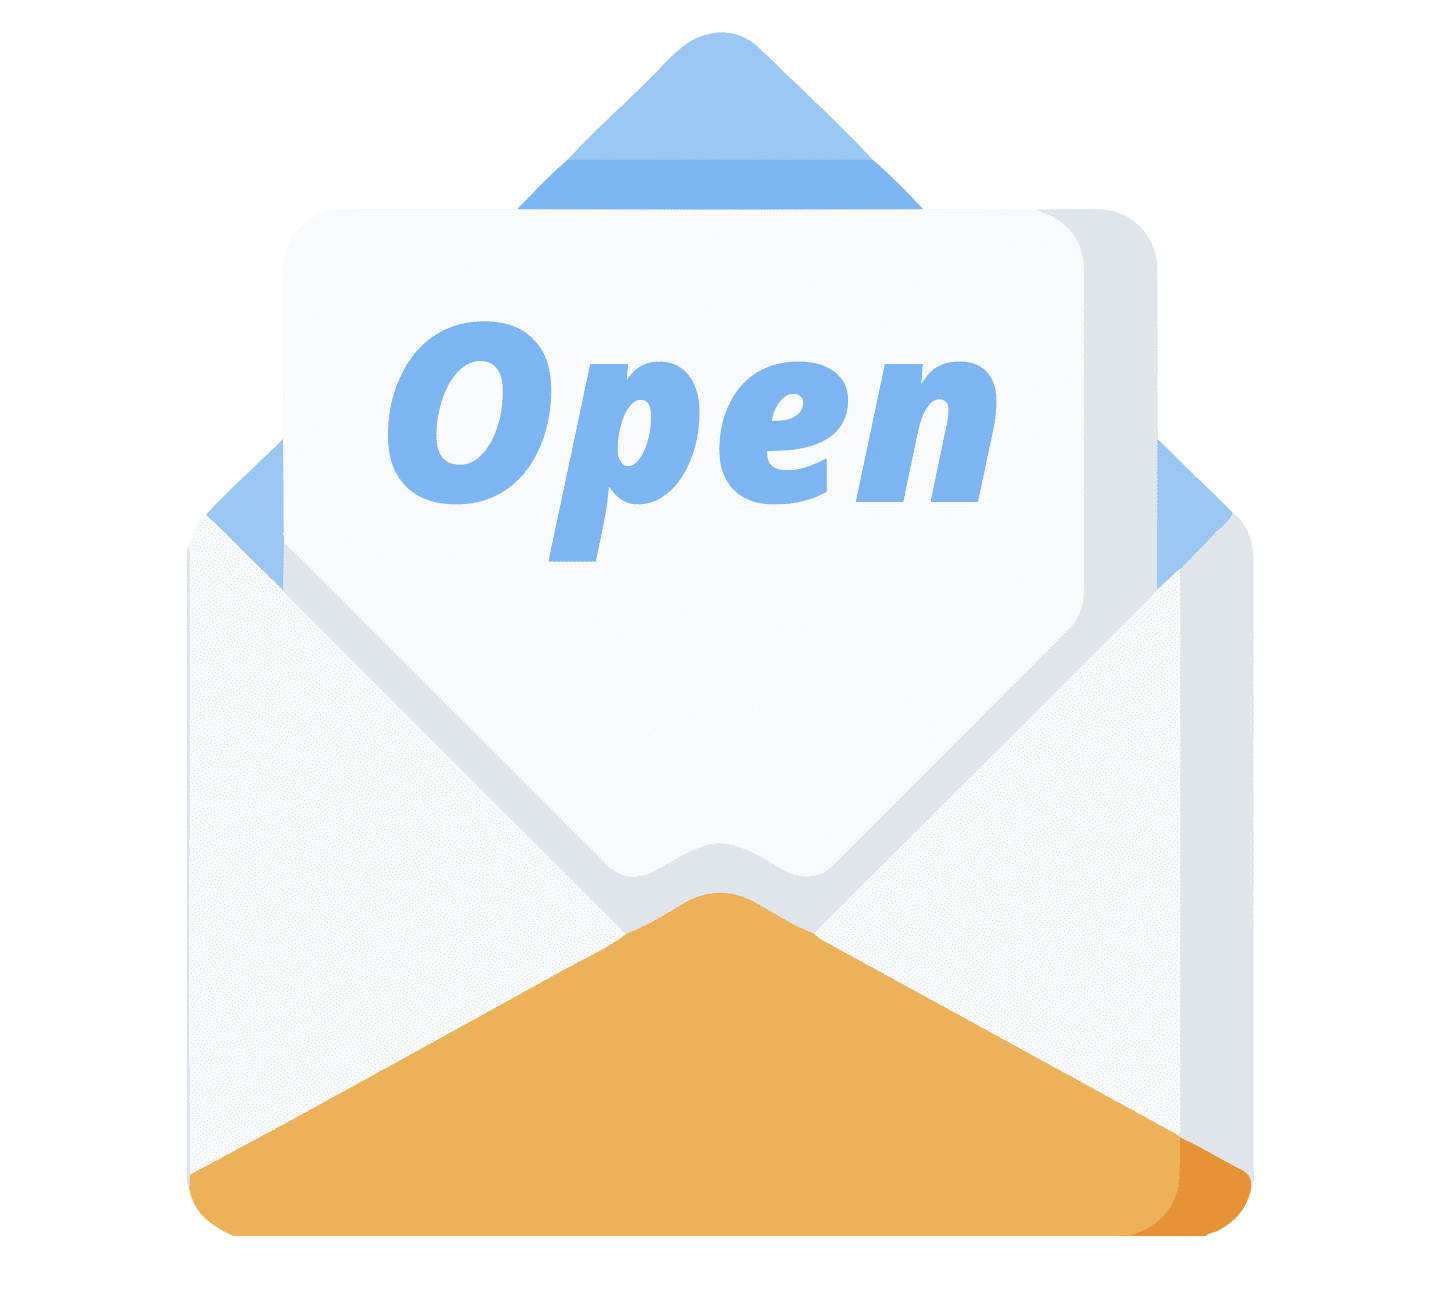 Email Open rate